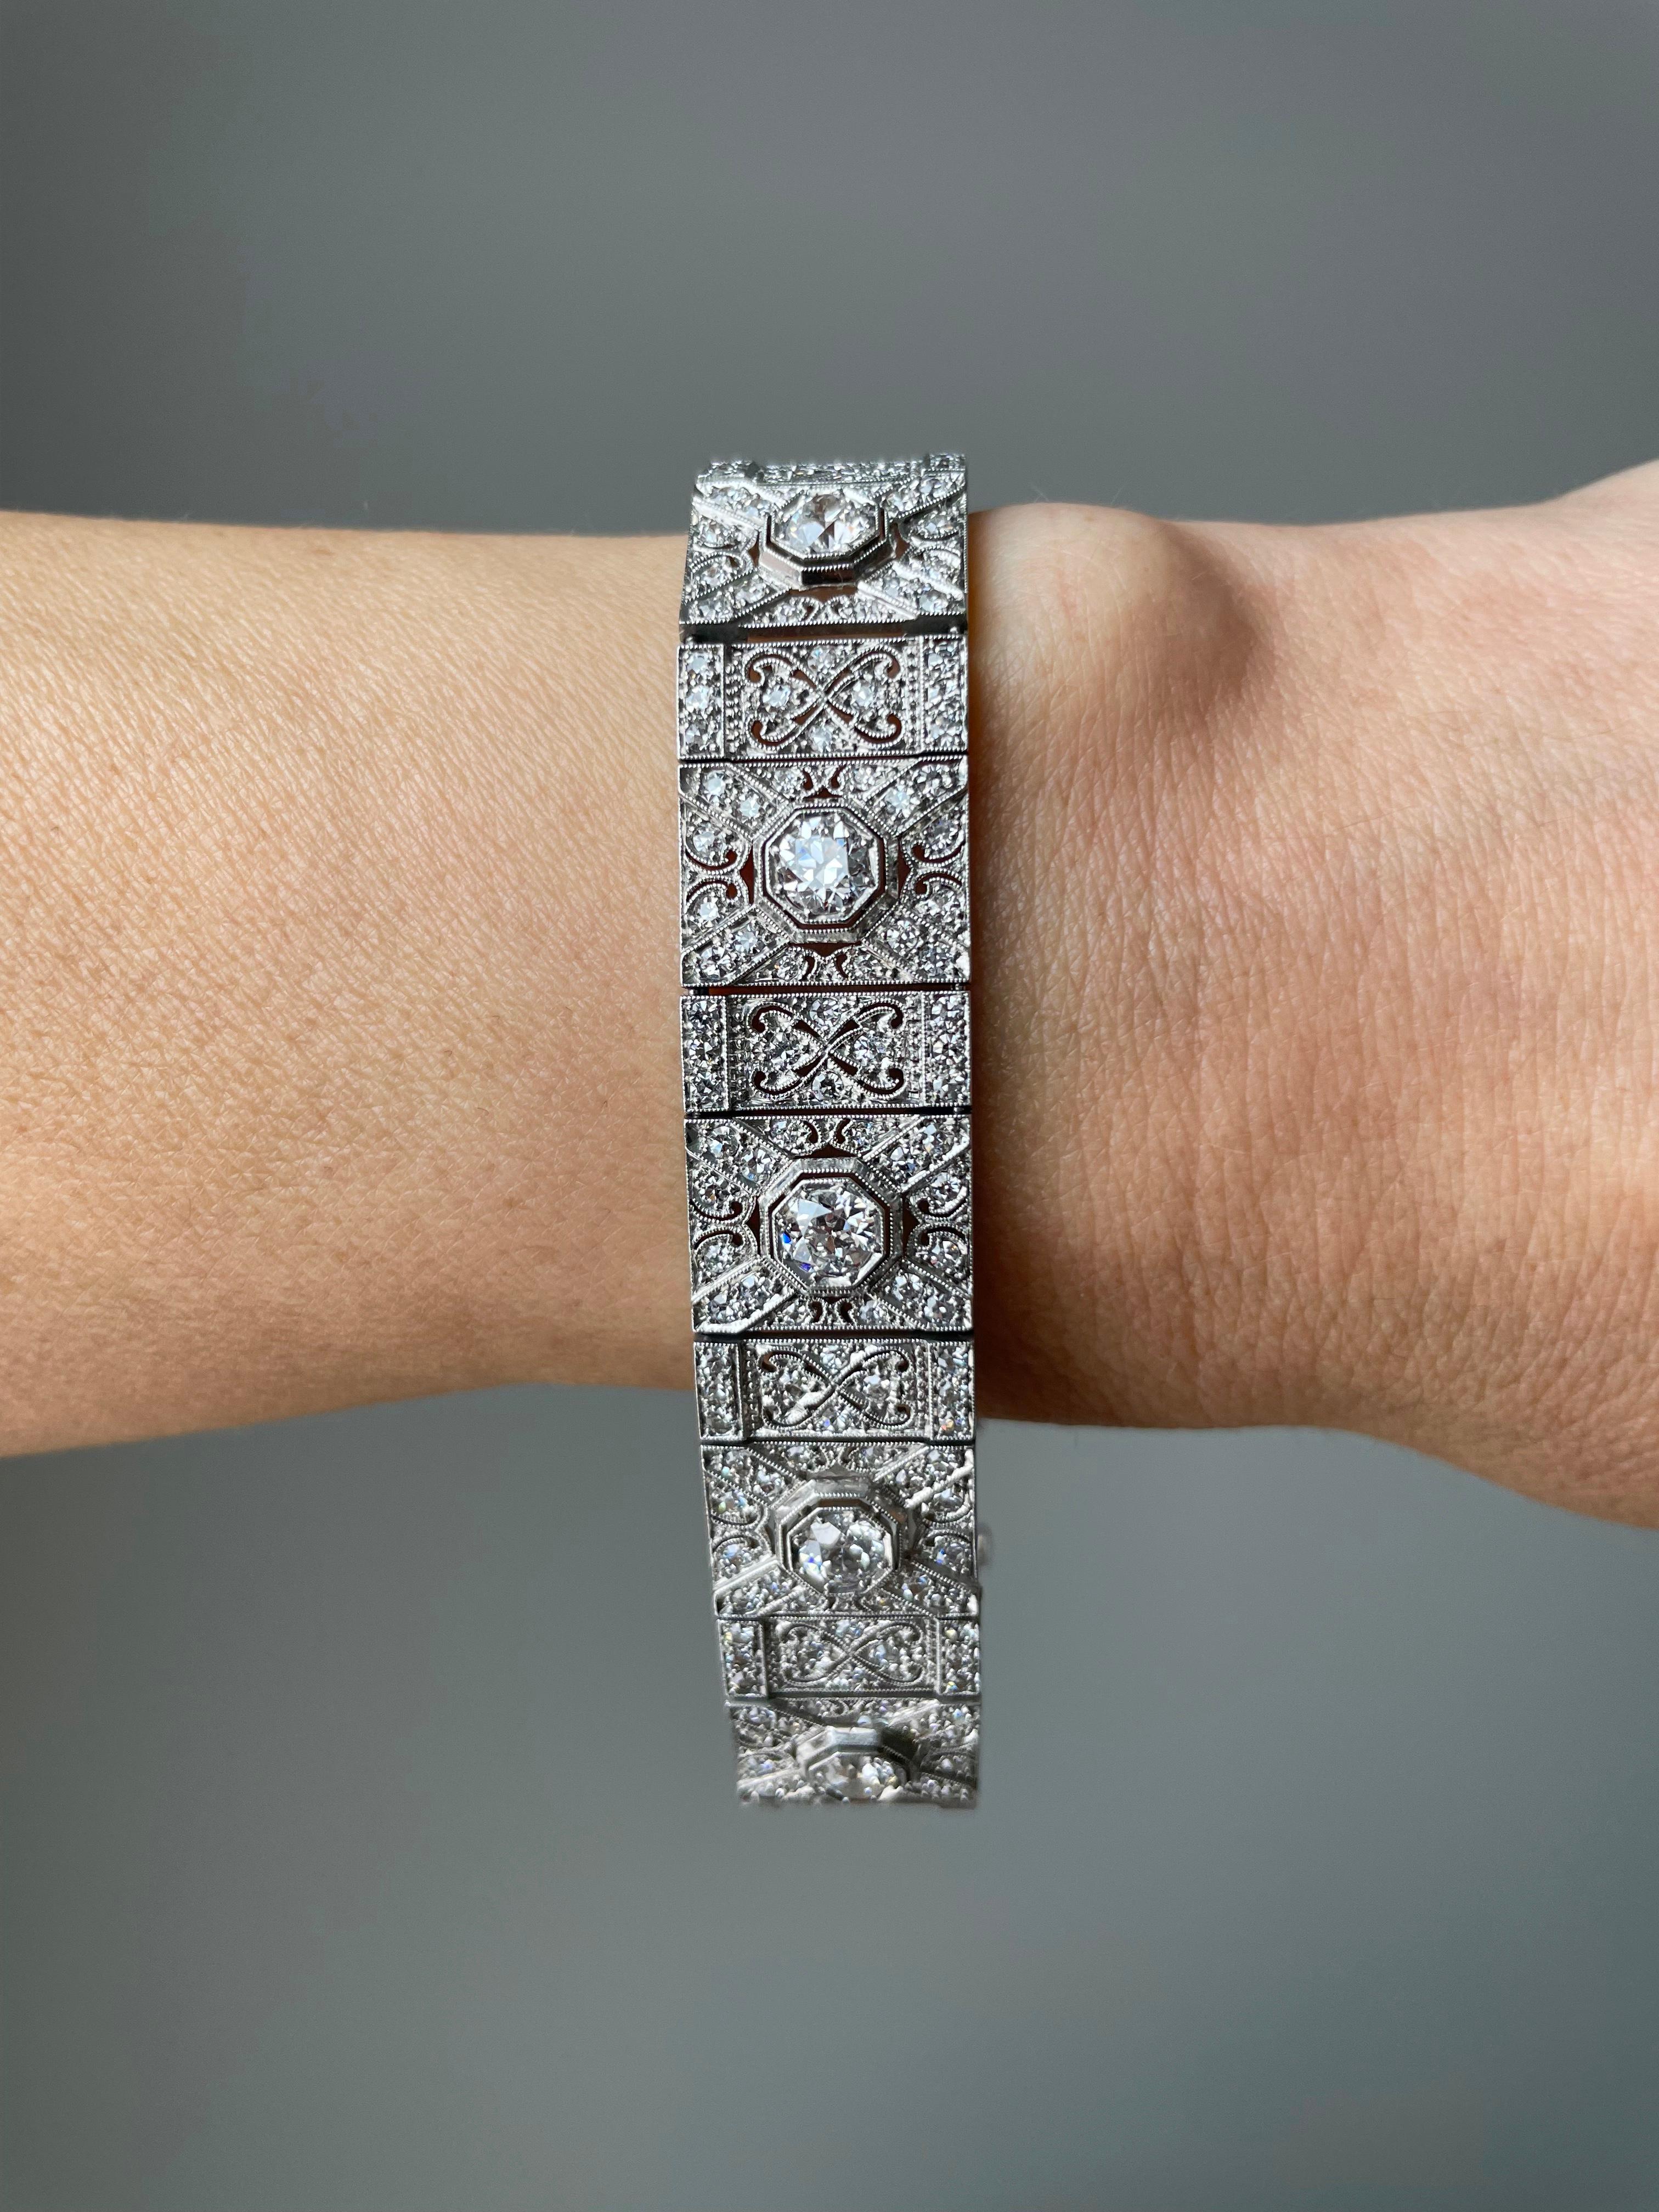 This dazzling Art Deco bracelet features a line of 11 bright-white European-cut diamonds, totaling 4.25 carats, presented in crisp, two-tiered octagonal settings, slightly raised above a rigorously detailed platinum bracelet. The bracelet glitters